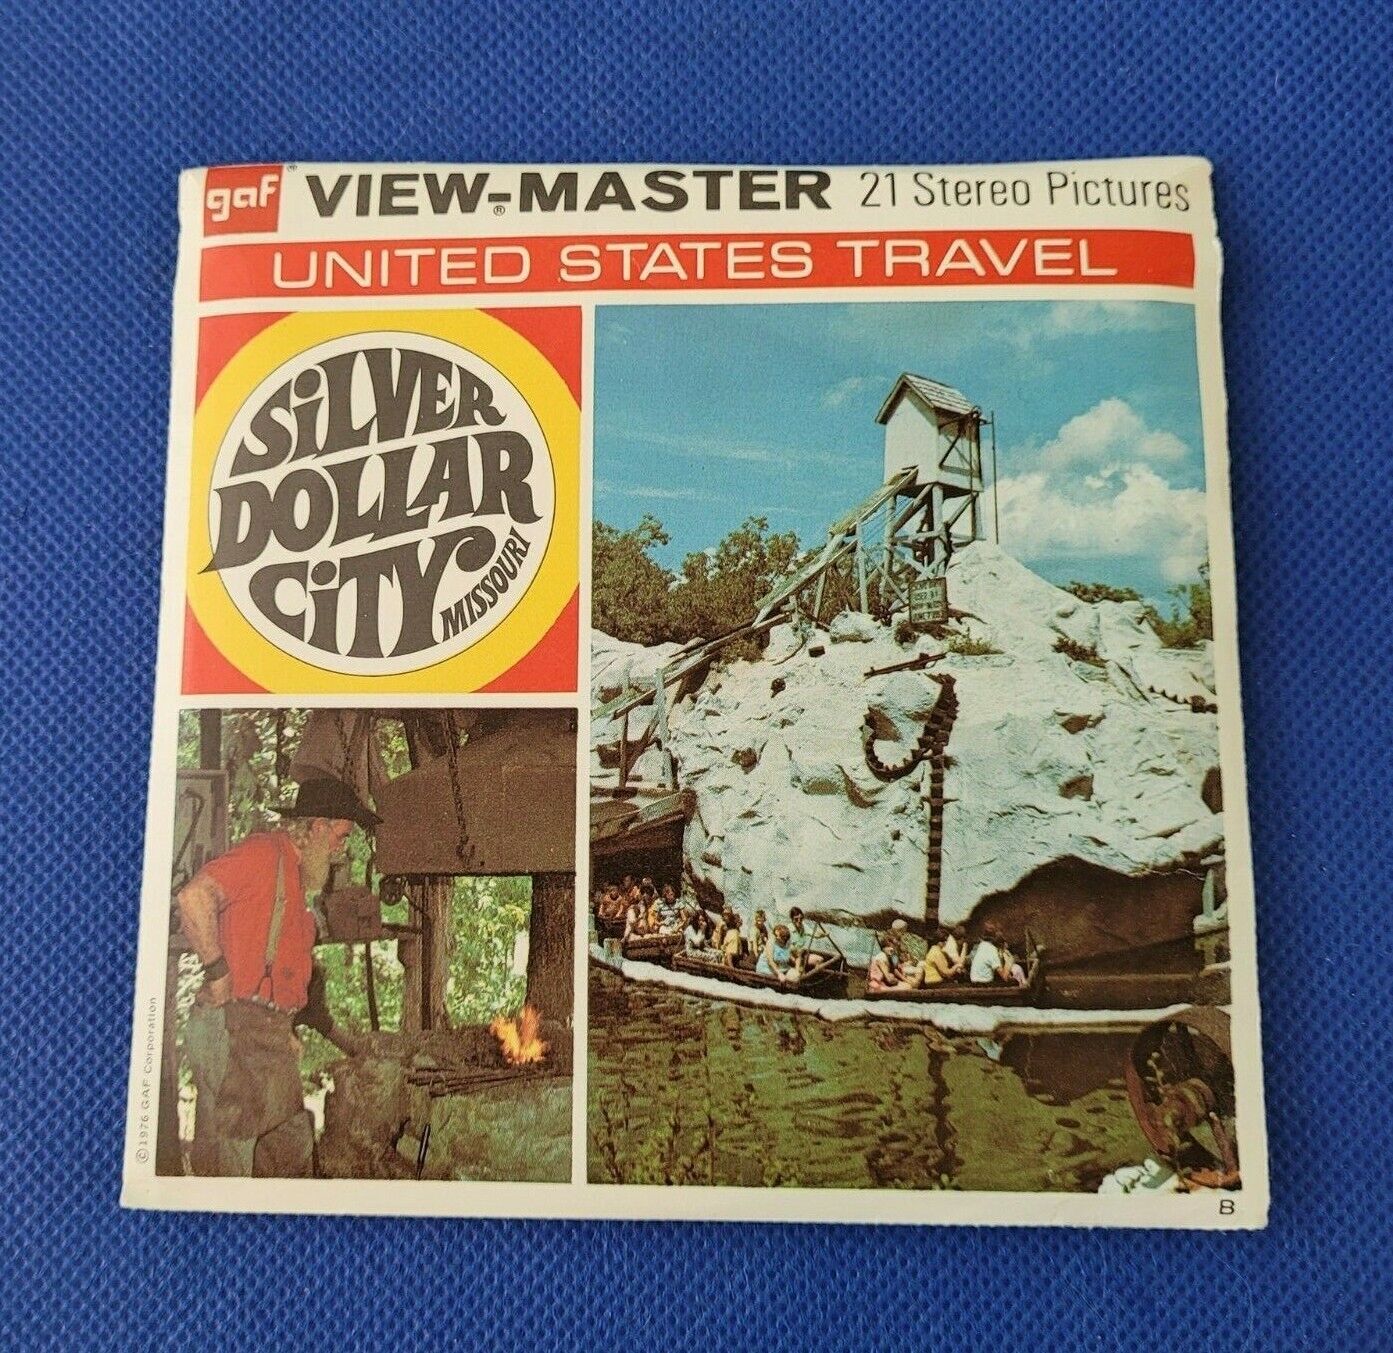 Color 1976 Gaf A457 Silver Dollar City Missouri view-master 3 Reels Packet